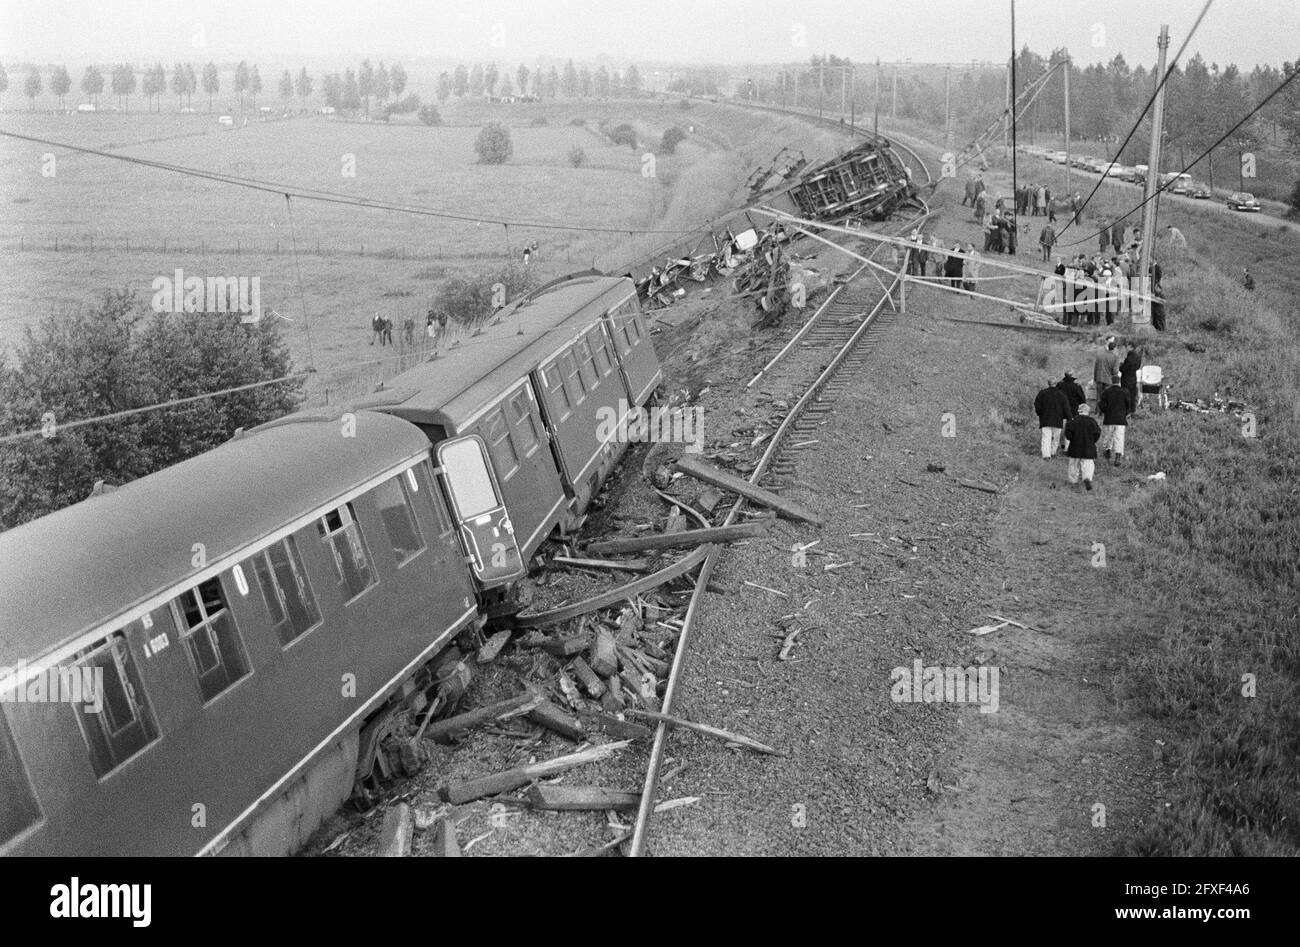 Train derails near Hedel (Gelderland), May 31, 1966, accidents, railroads, trains, The Netherlands, 20th century press agency photo, news to remember, documentary, historic photography 1945-1990, visual stories, human history of the Twentieth Century, capturing moments in time Stock Photo